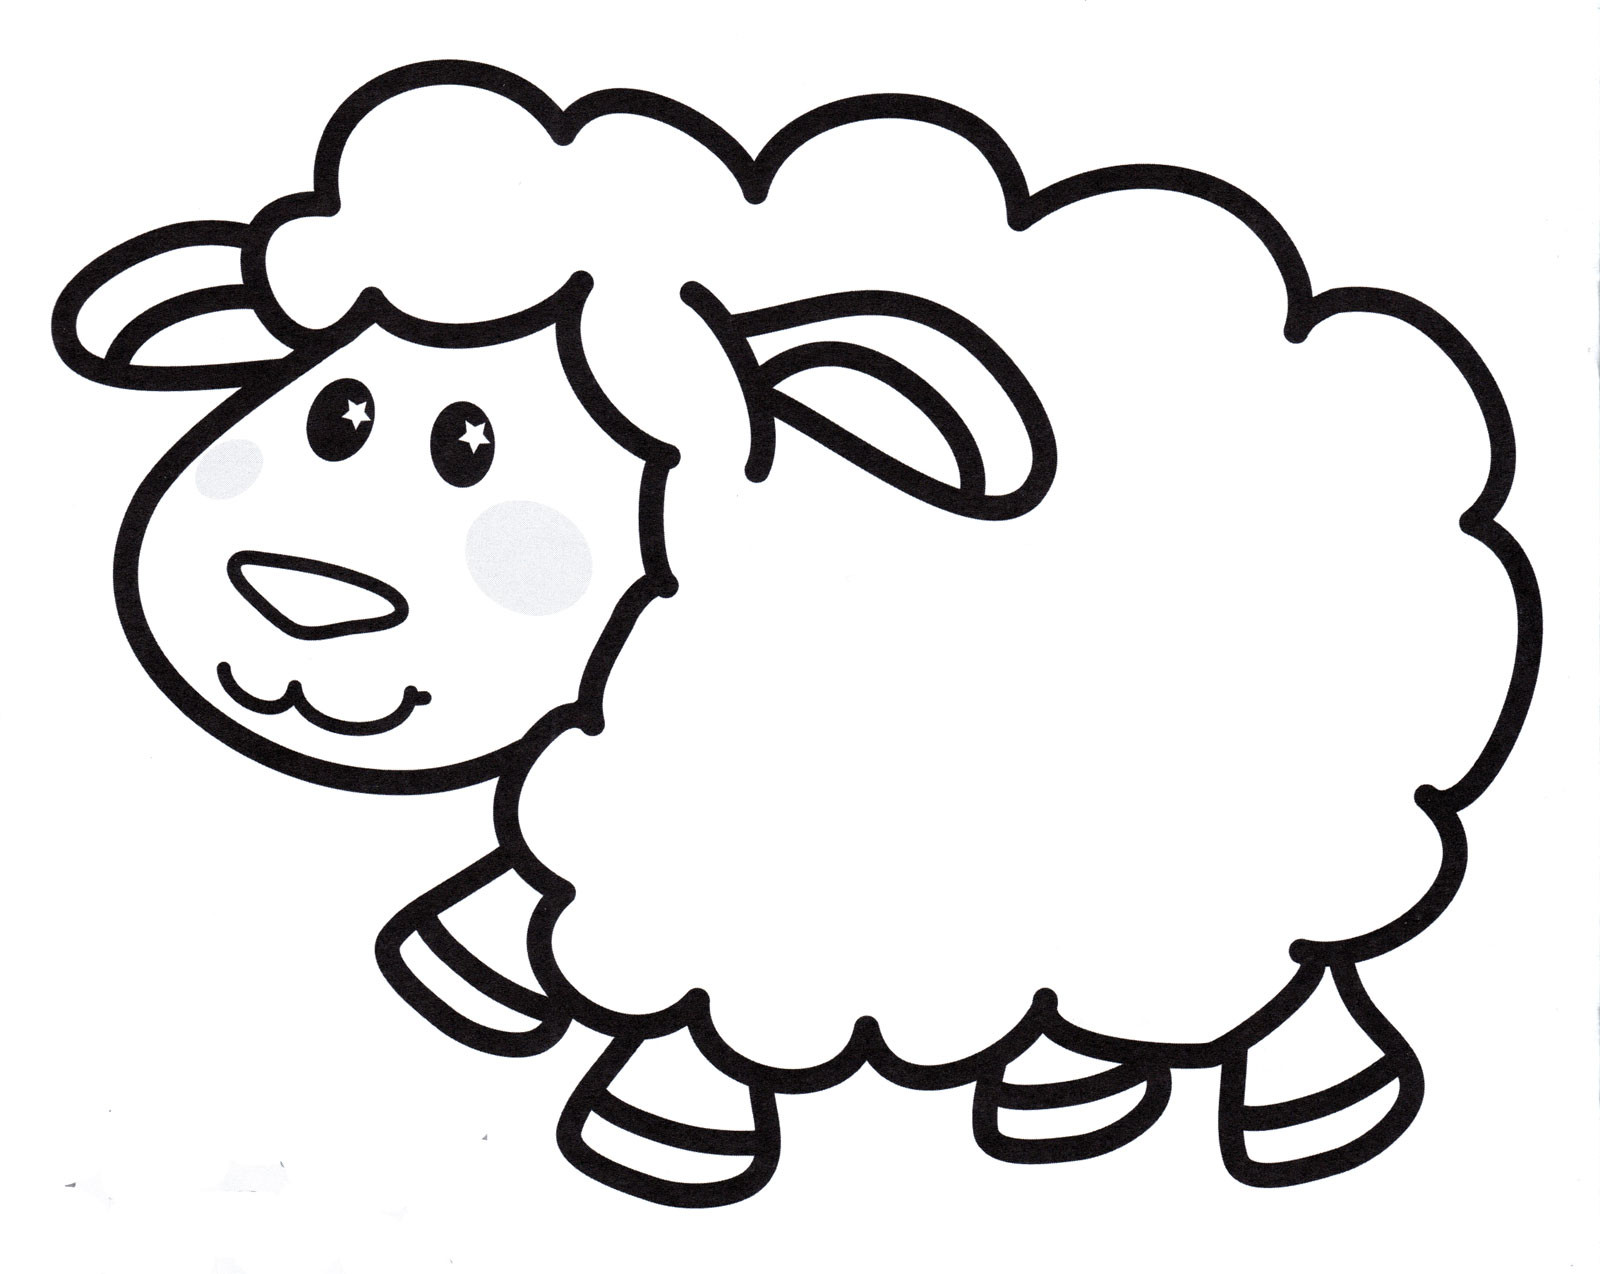 Sheep for children 4 5 years old #8